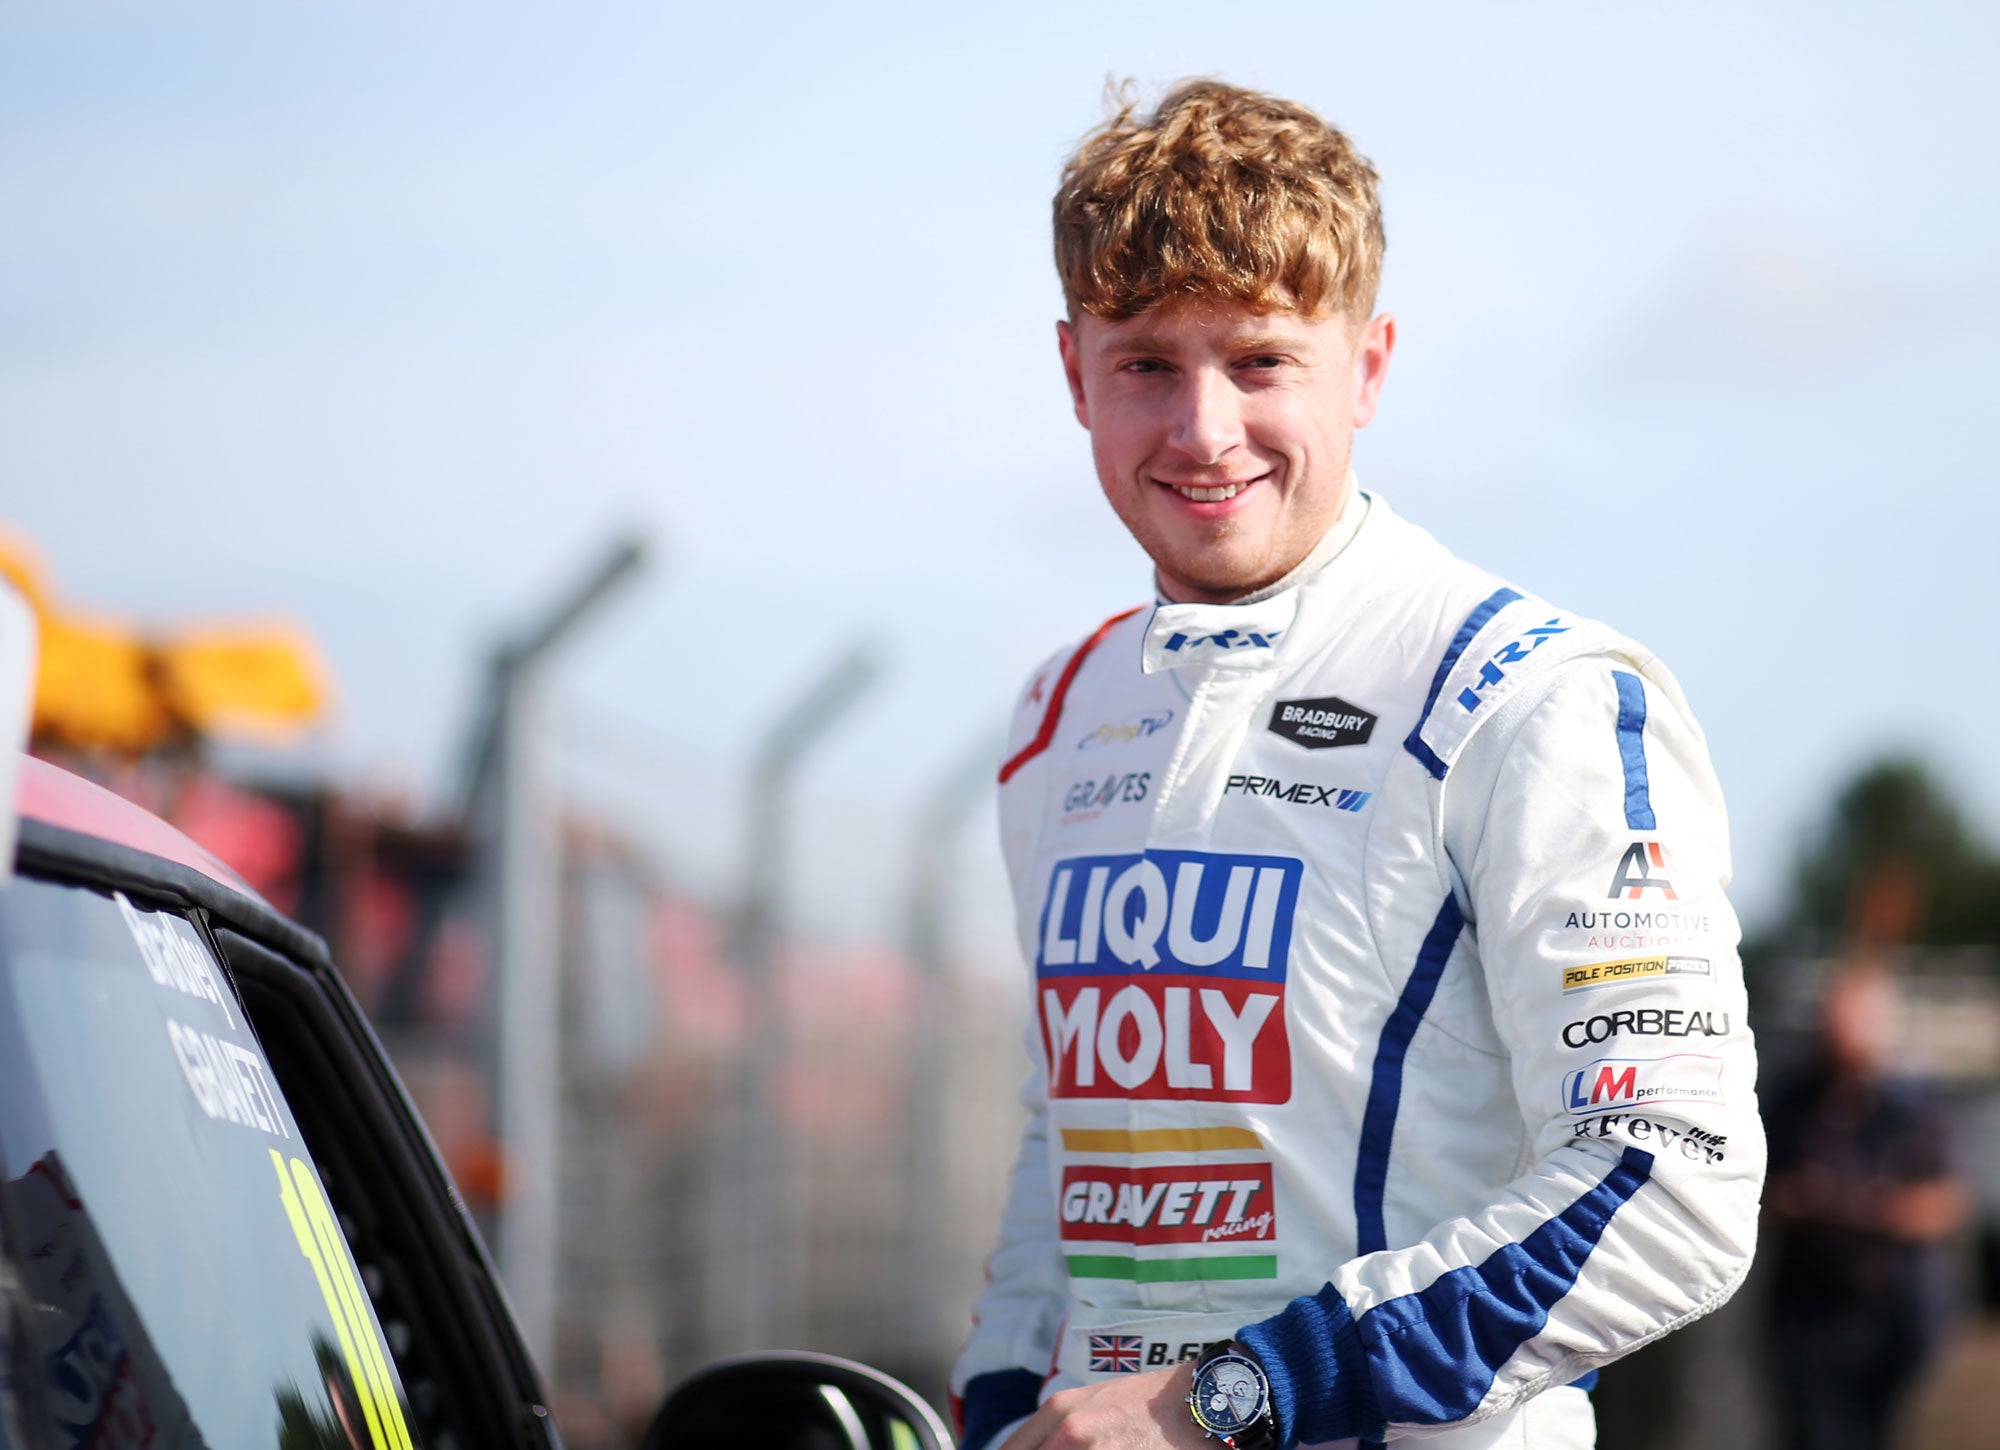 Bradley Gravett son of BTCC British Touring Car Champion Robb Gravett in the MINI Challenge JCW Series at Croft in 2021 Picture of Bradley Smiling Graves Motorsport Cooper Racing Driver LIQUI MOLY LM Performance Thinking it Better